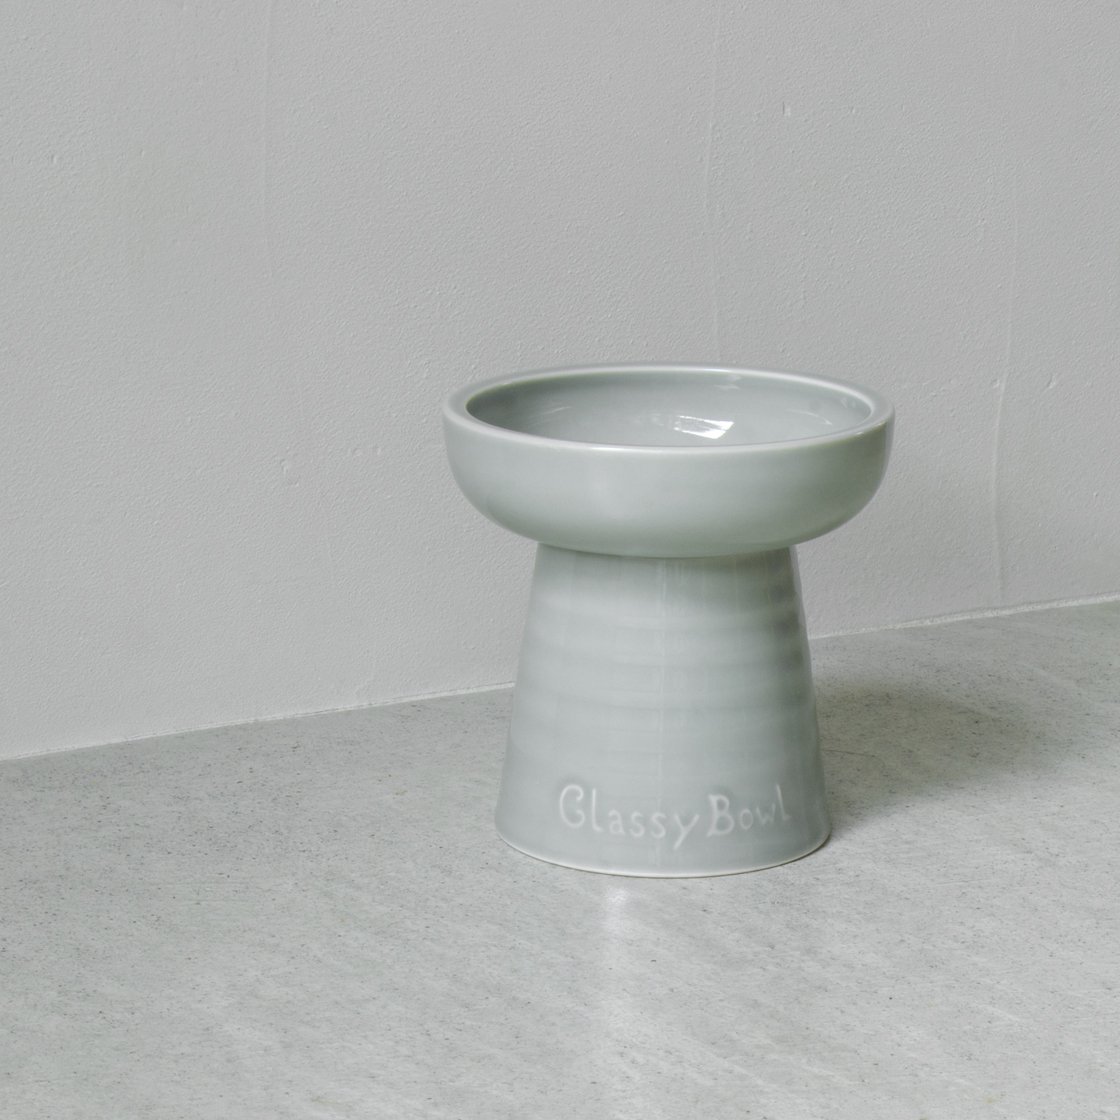 <img class='new_mark_img1' src='https://img.shop-pro.jp/img/new/icons57.gif' style='border:none;display:inline;margin:0px;padding:0px;width:auto;' />Classy Bowl ȥåȥ5Made in Japan